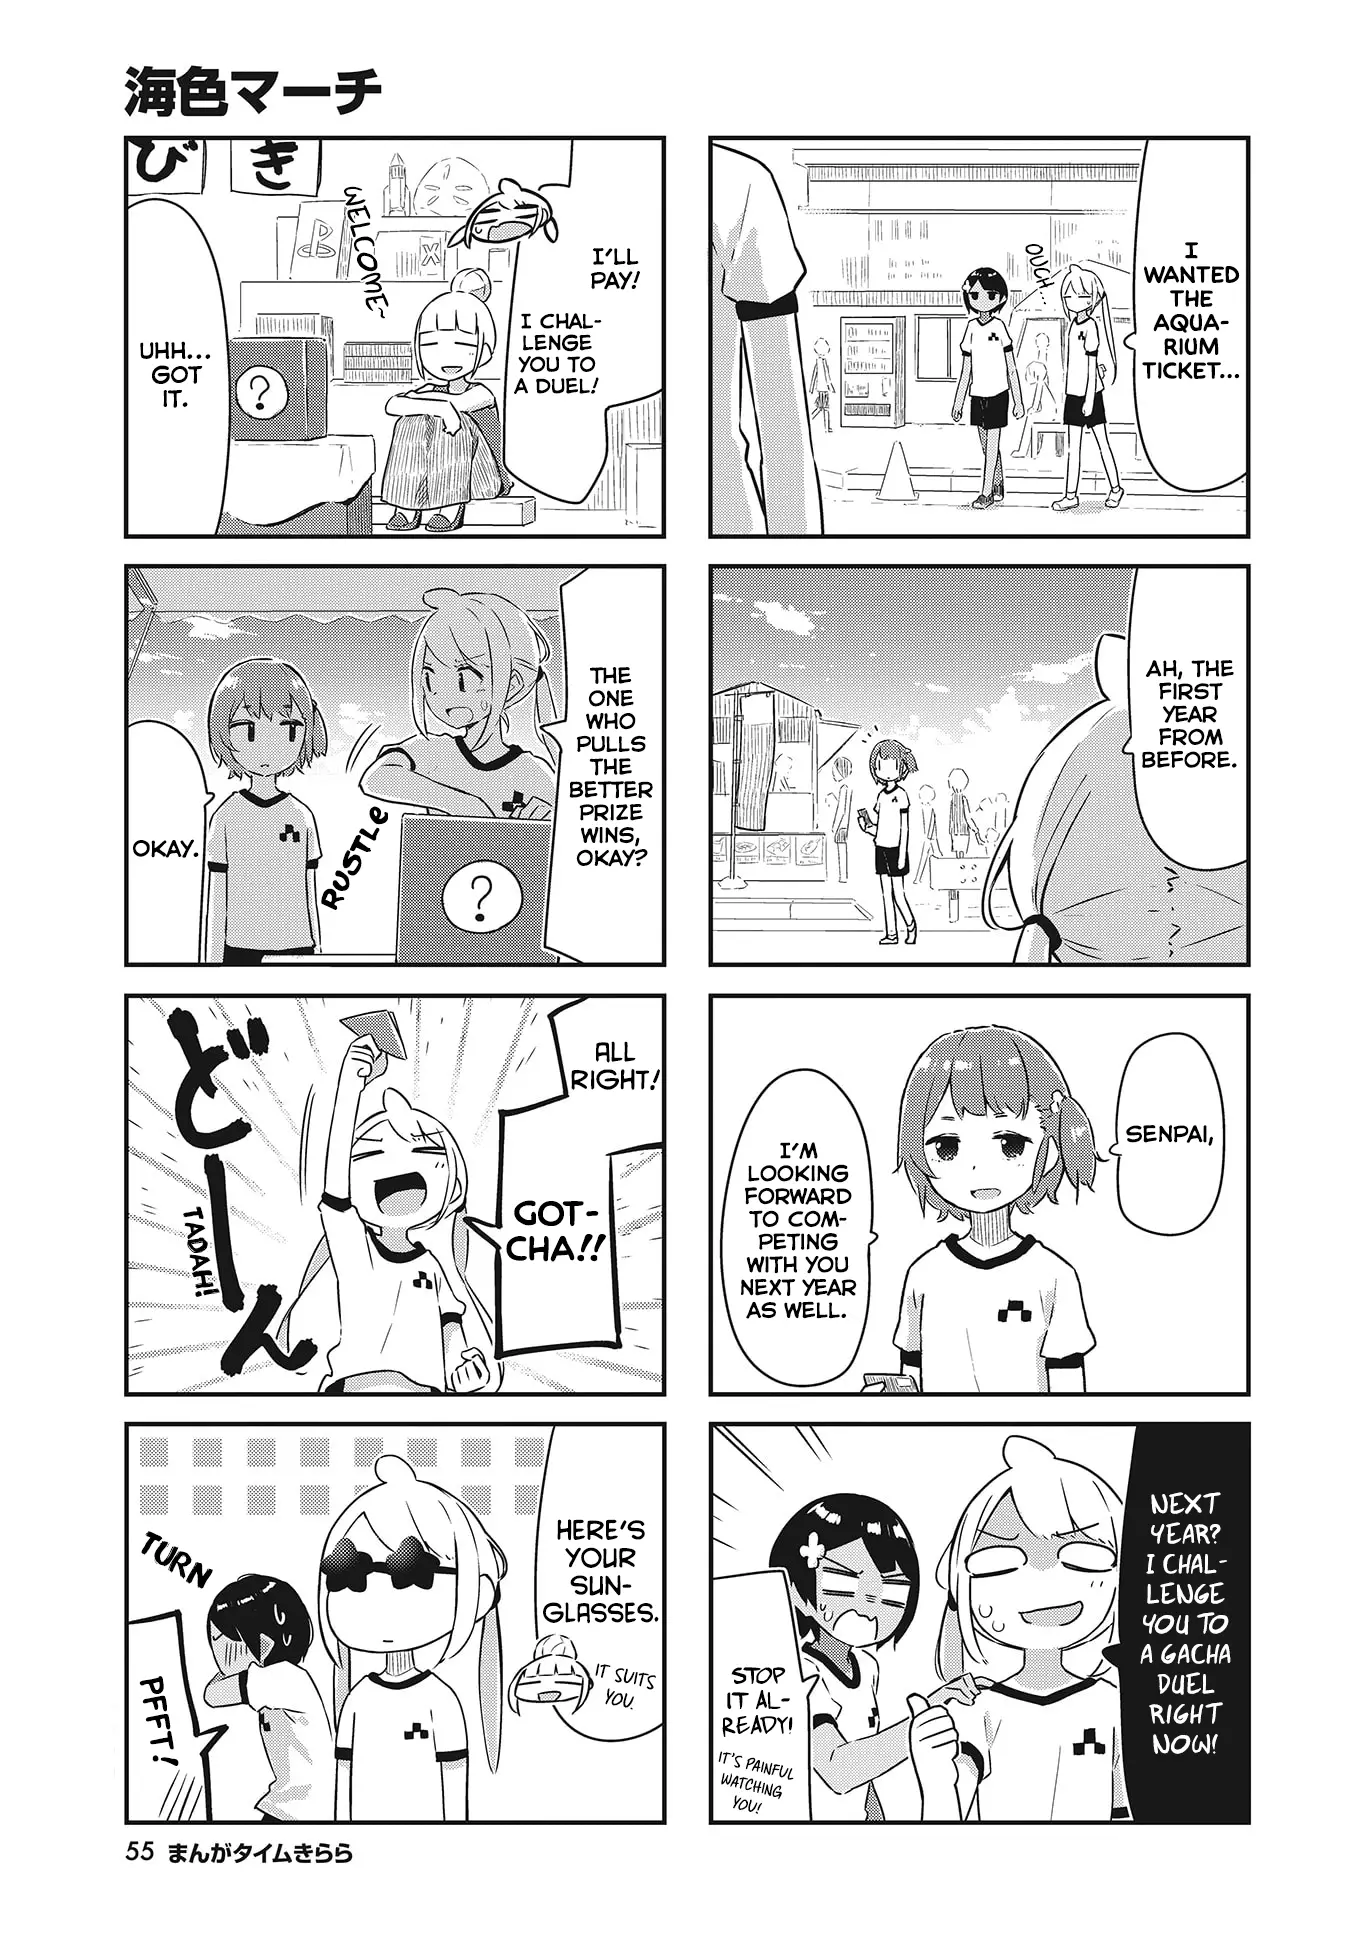 Umiiro March - 18 page 8